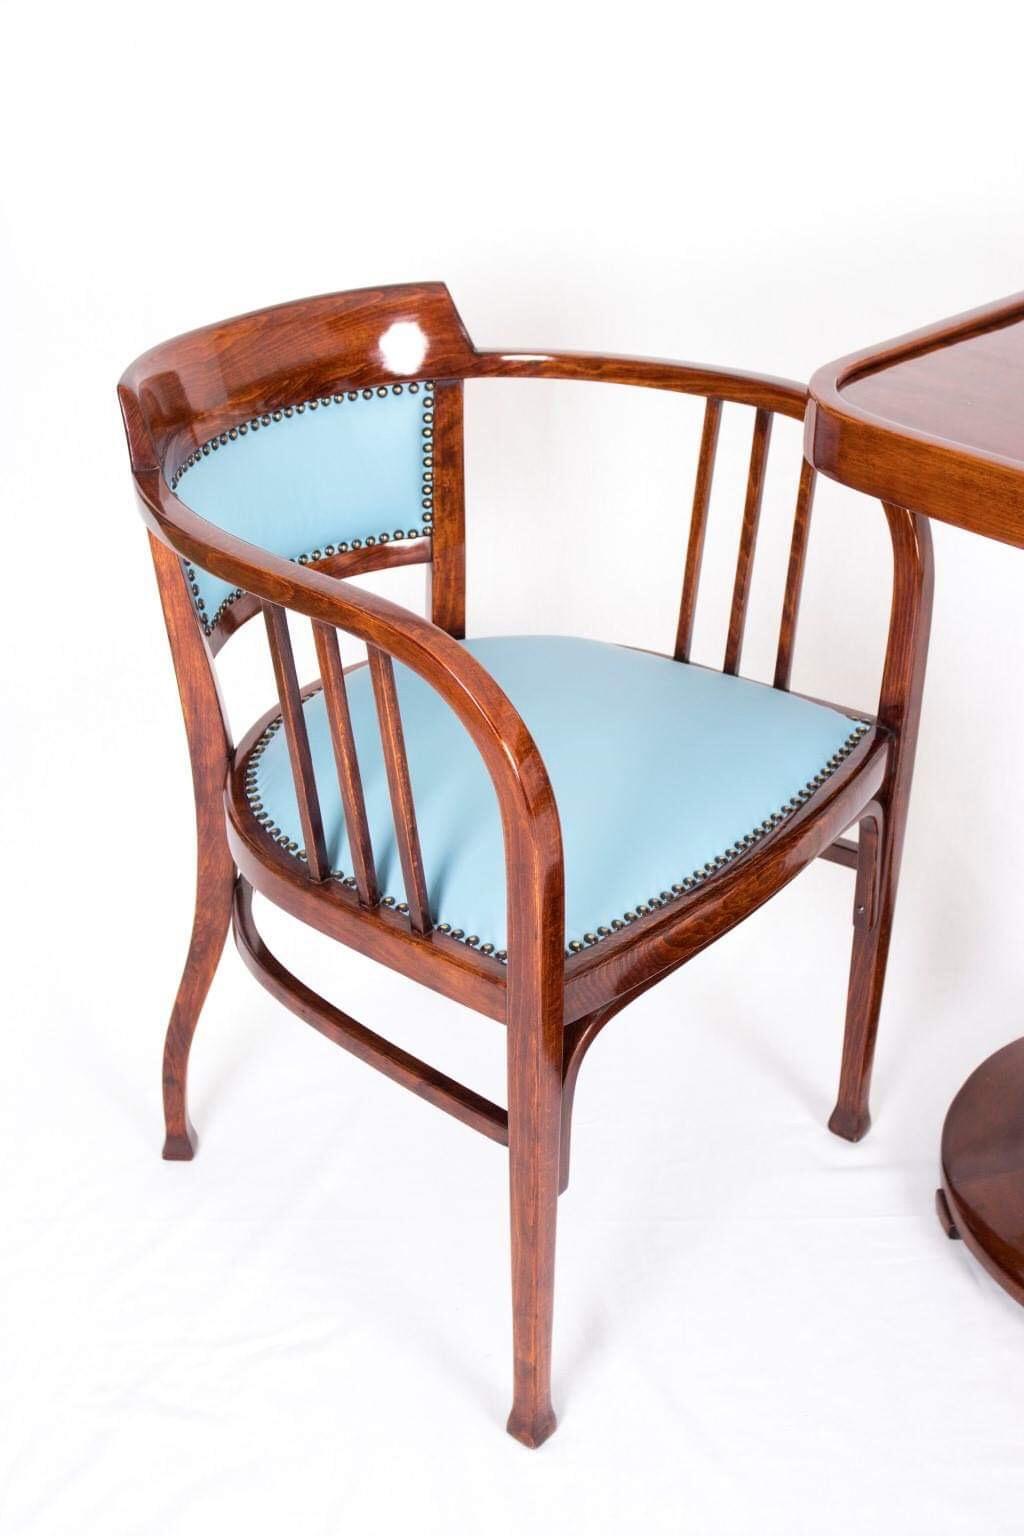 Bentwood Art Nouveau Vienna Armchairs Attributed to Otto Wagner Thonet Gebruder